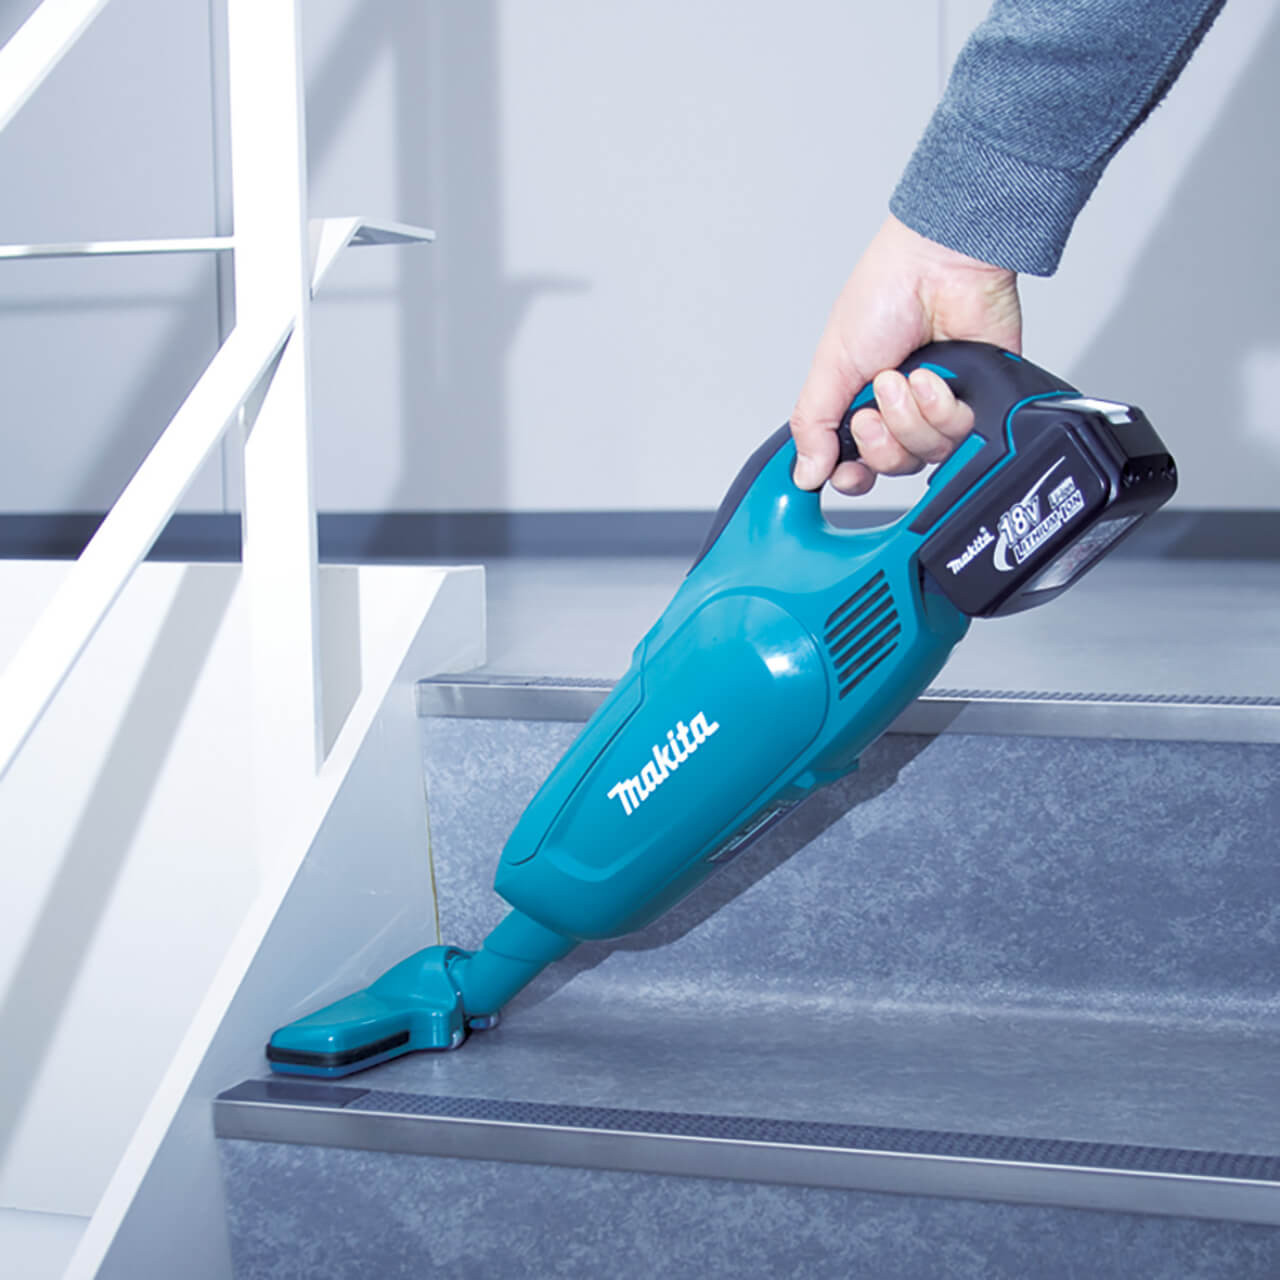 Makita 18V Stick Vacuum. Push Button Switch. Disposable Dust Bag. Teal Housing - Tool Only